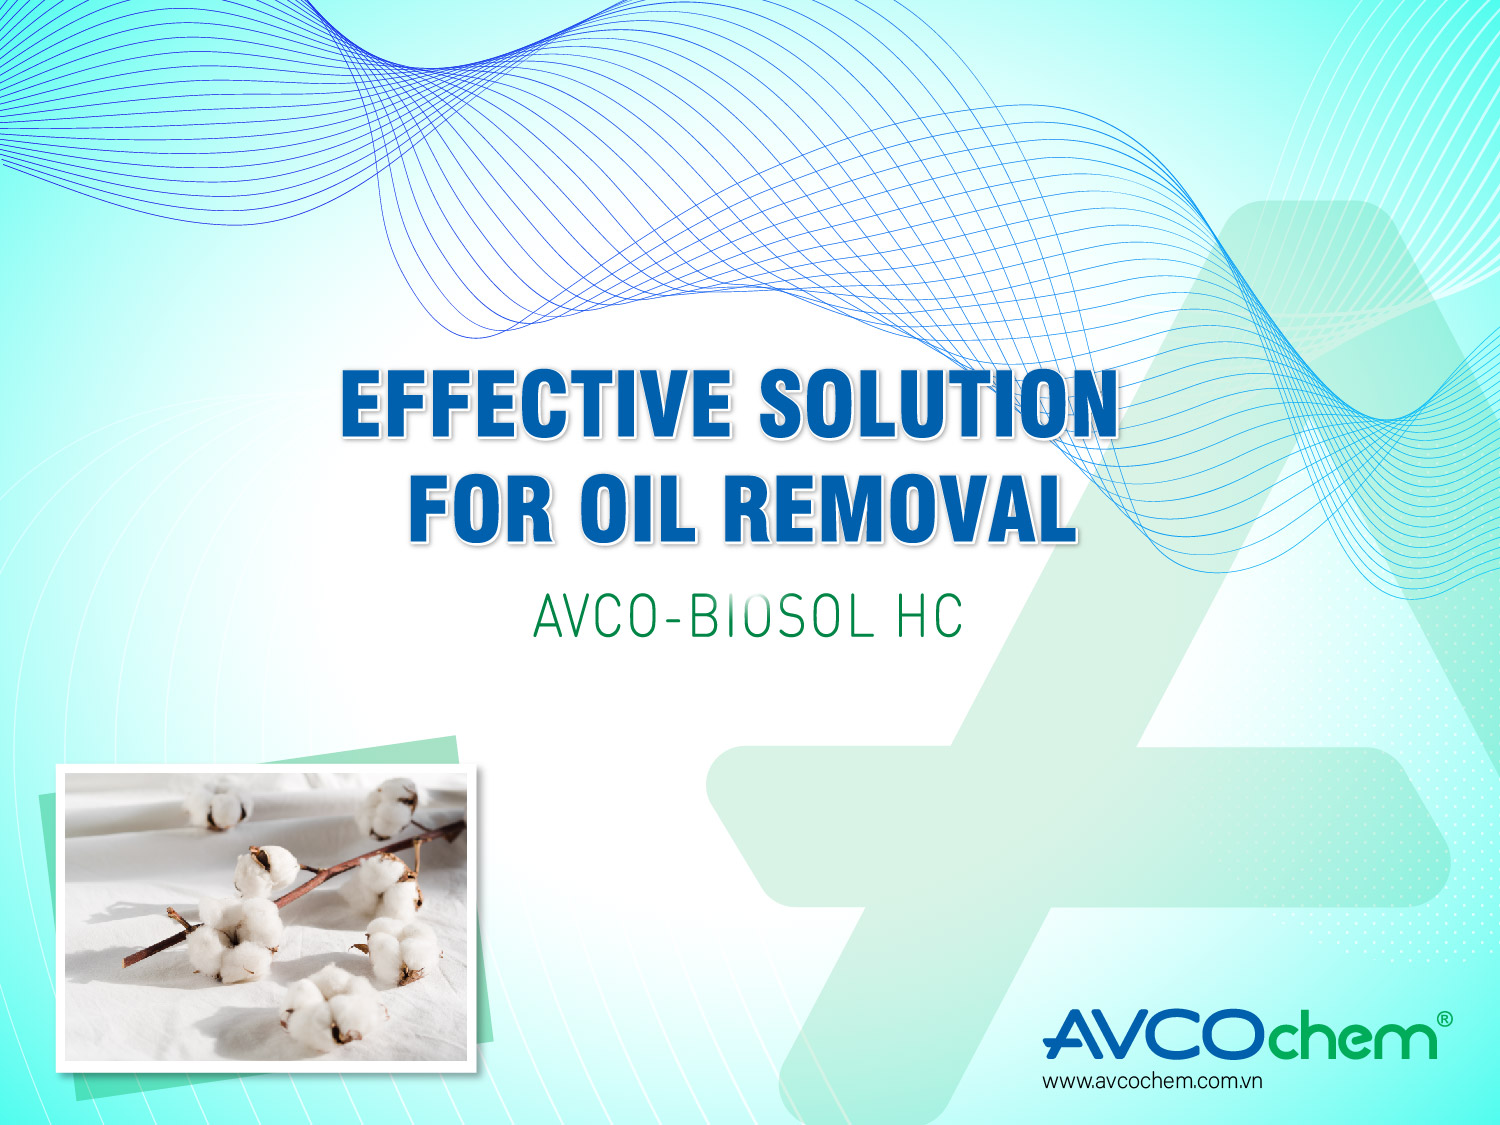 EFFECTIVE SOLUTION FOR OIL REMOVAL